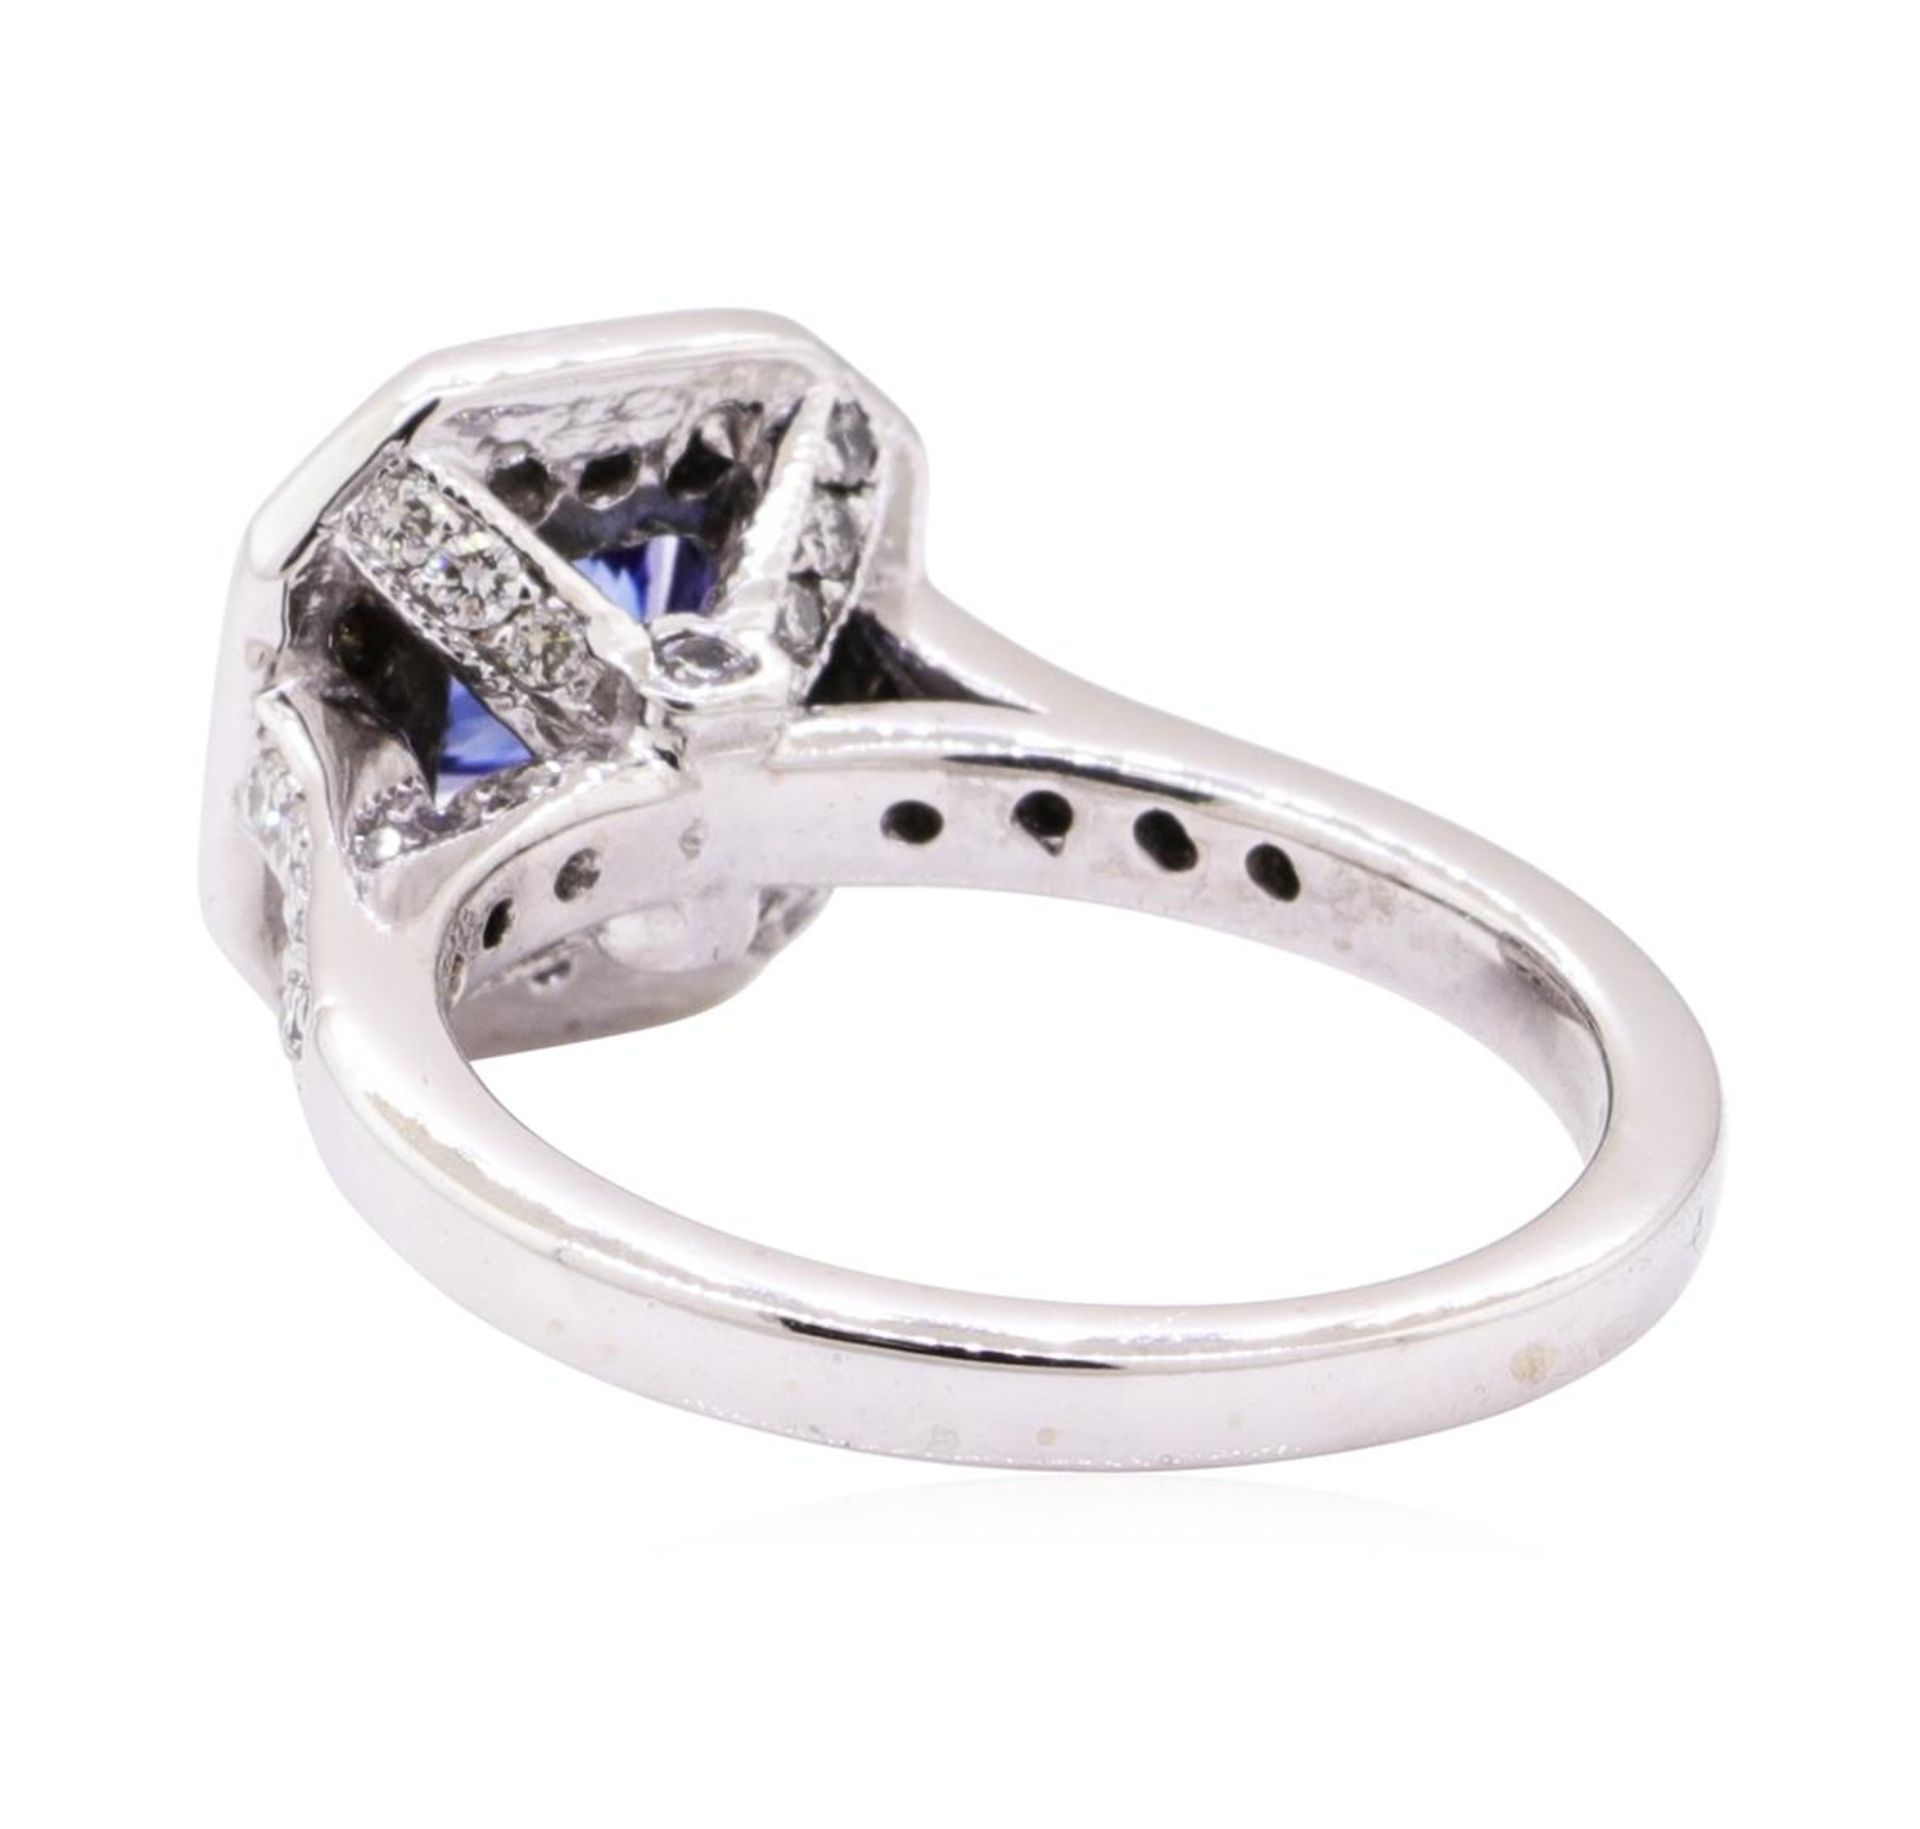 1.64 ctw Blue Sapphire And Diamond Ring - 14KT White Gold - Image 3 of 5